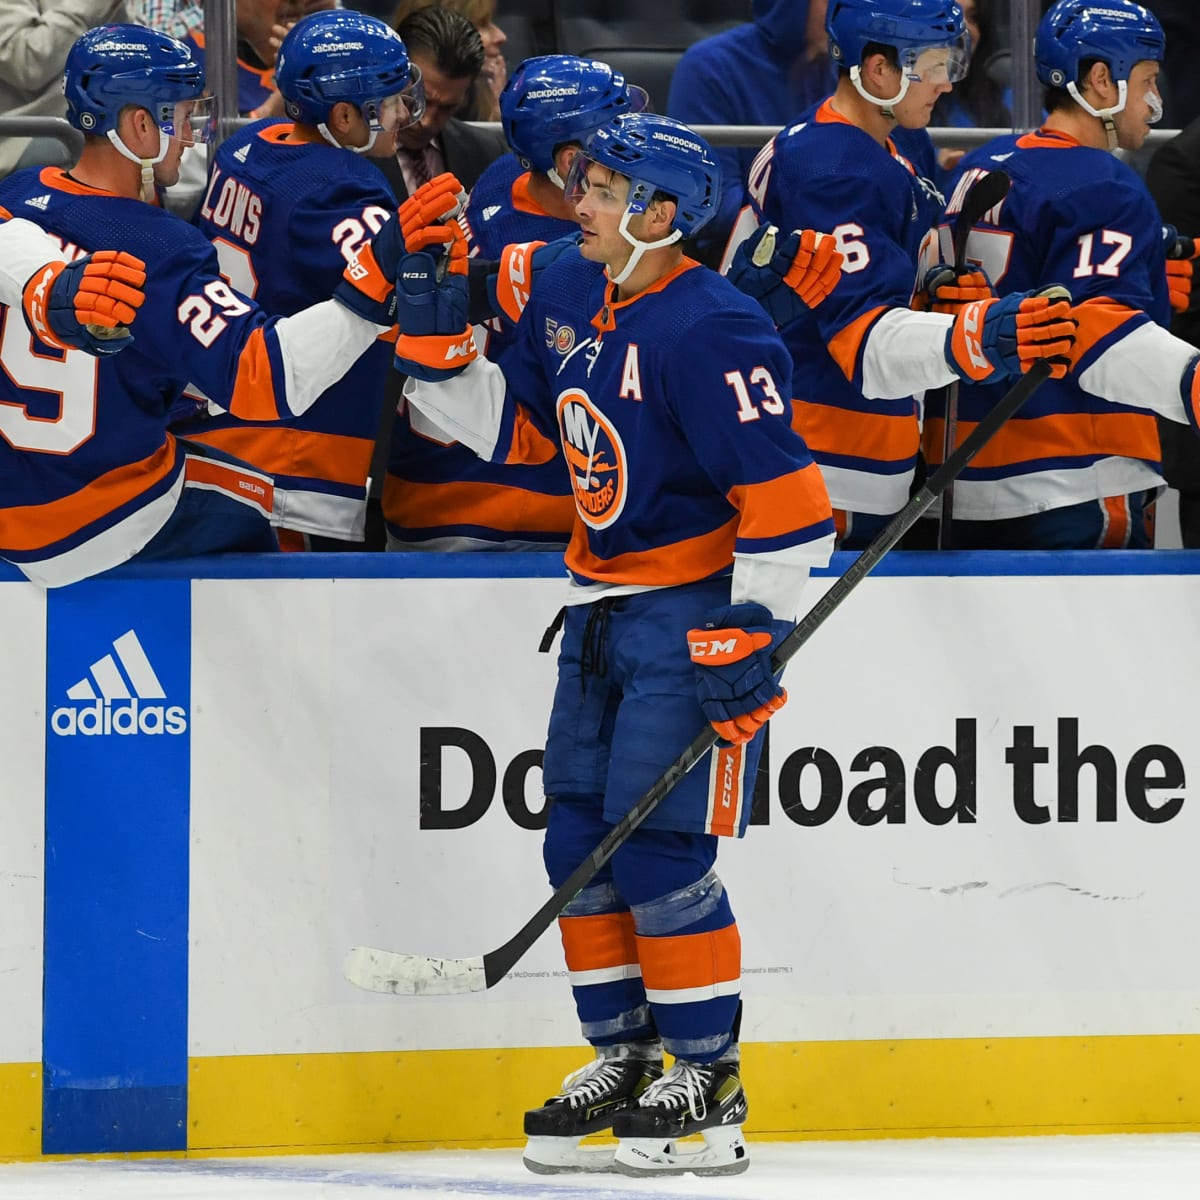 NY Islanders Might Have to Run the Table to Make the Playoffs